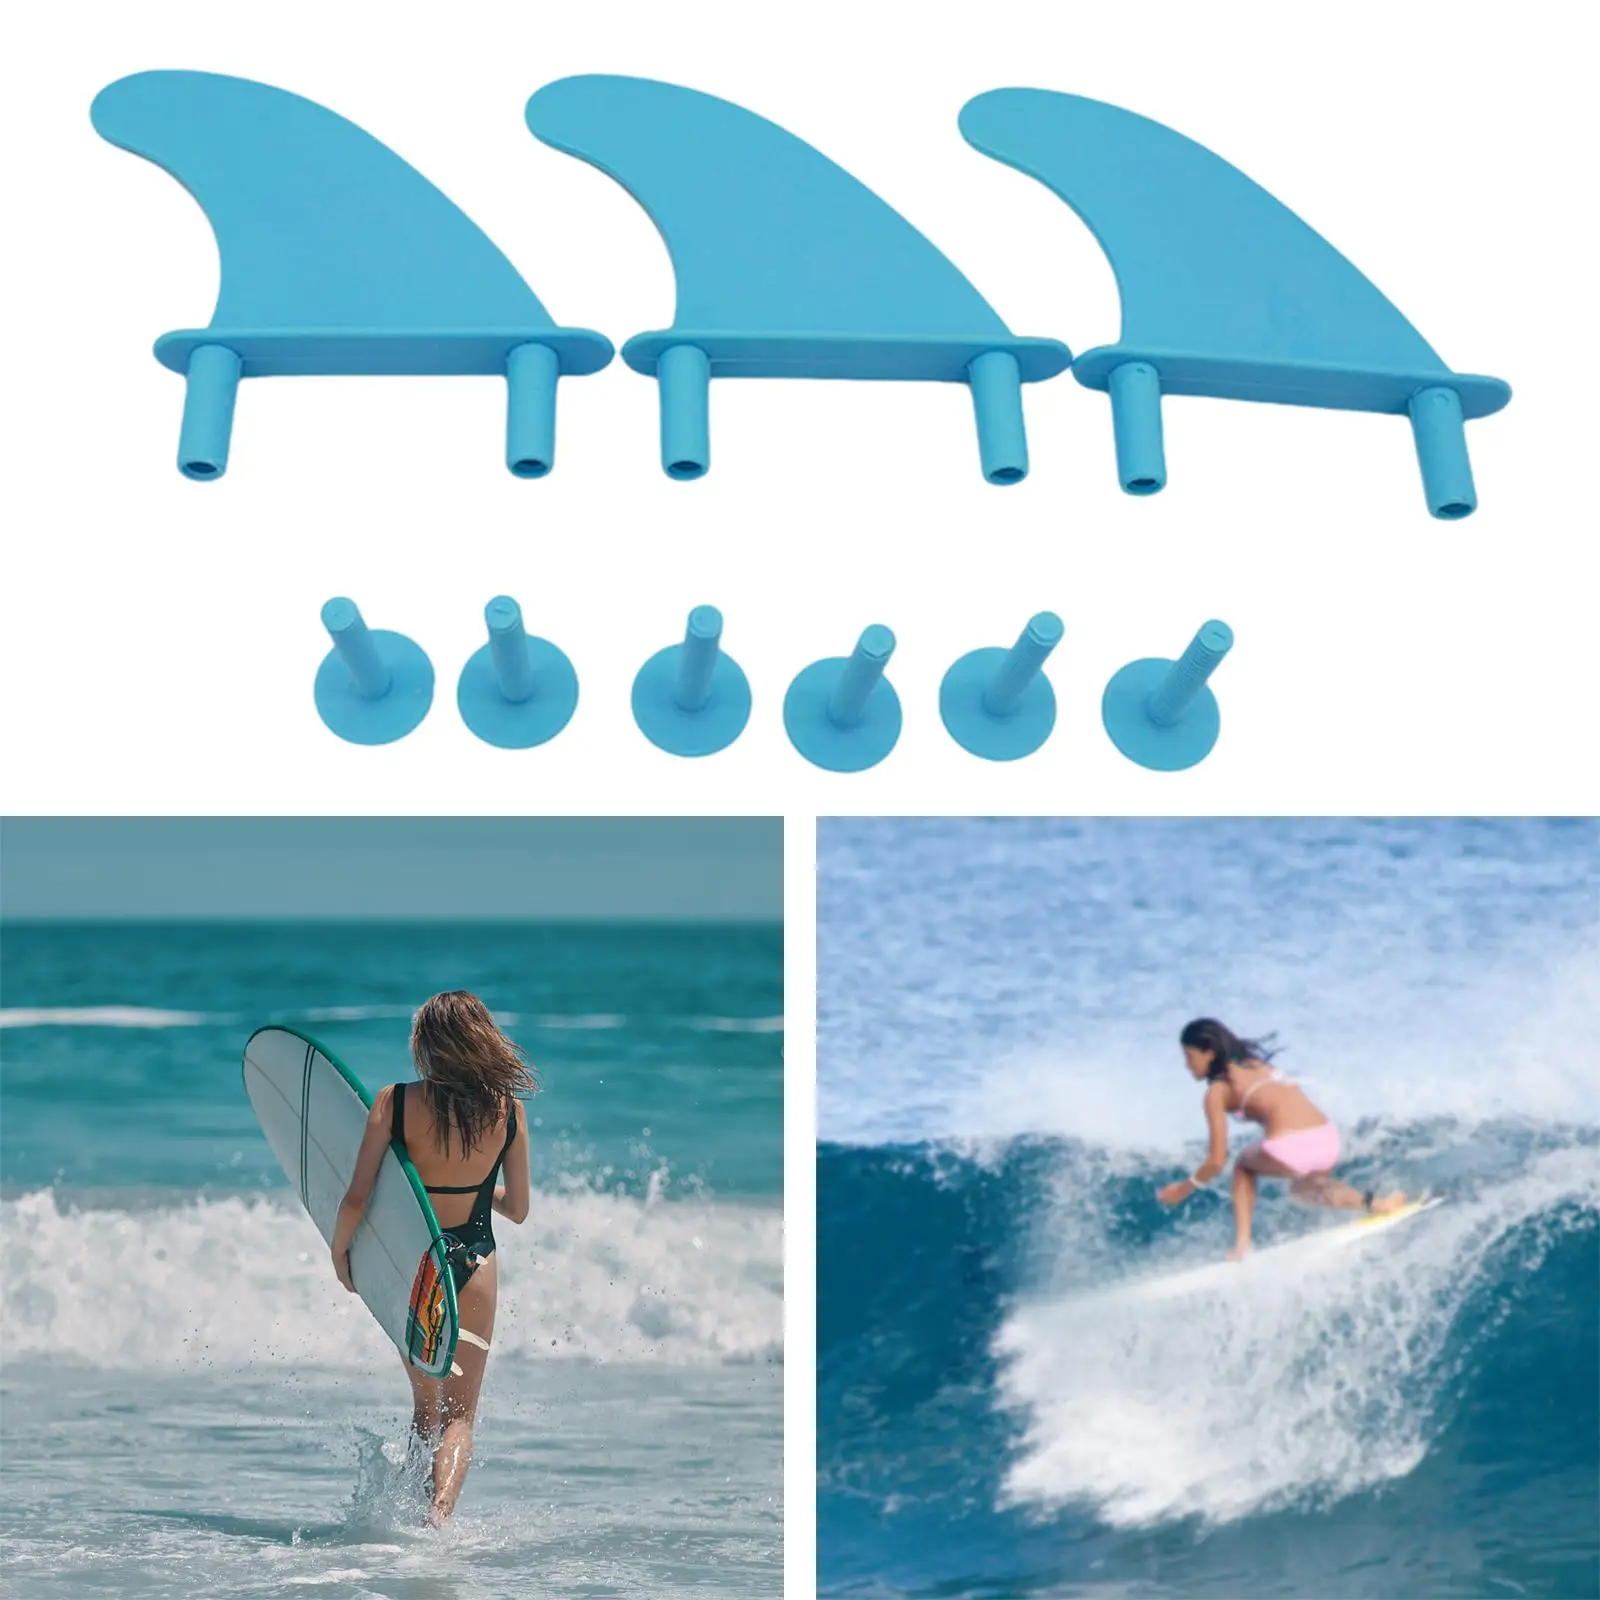 3x Thruster Fins Outdoor Water Sports Soft Top Surfboard Fins Longboard Surf Fin Screws for Stand up Paddle Board Beach Summer